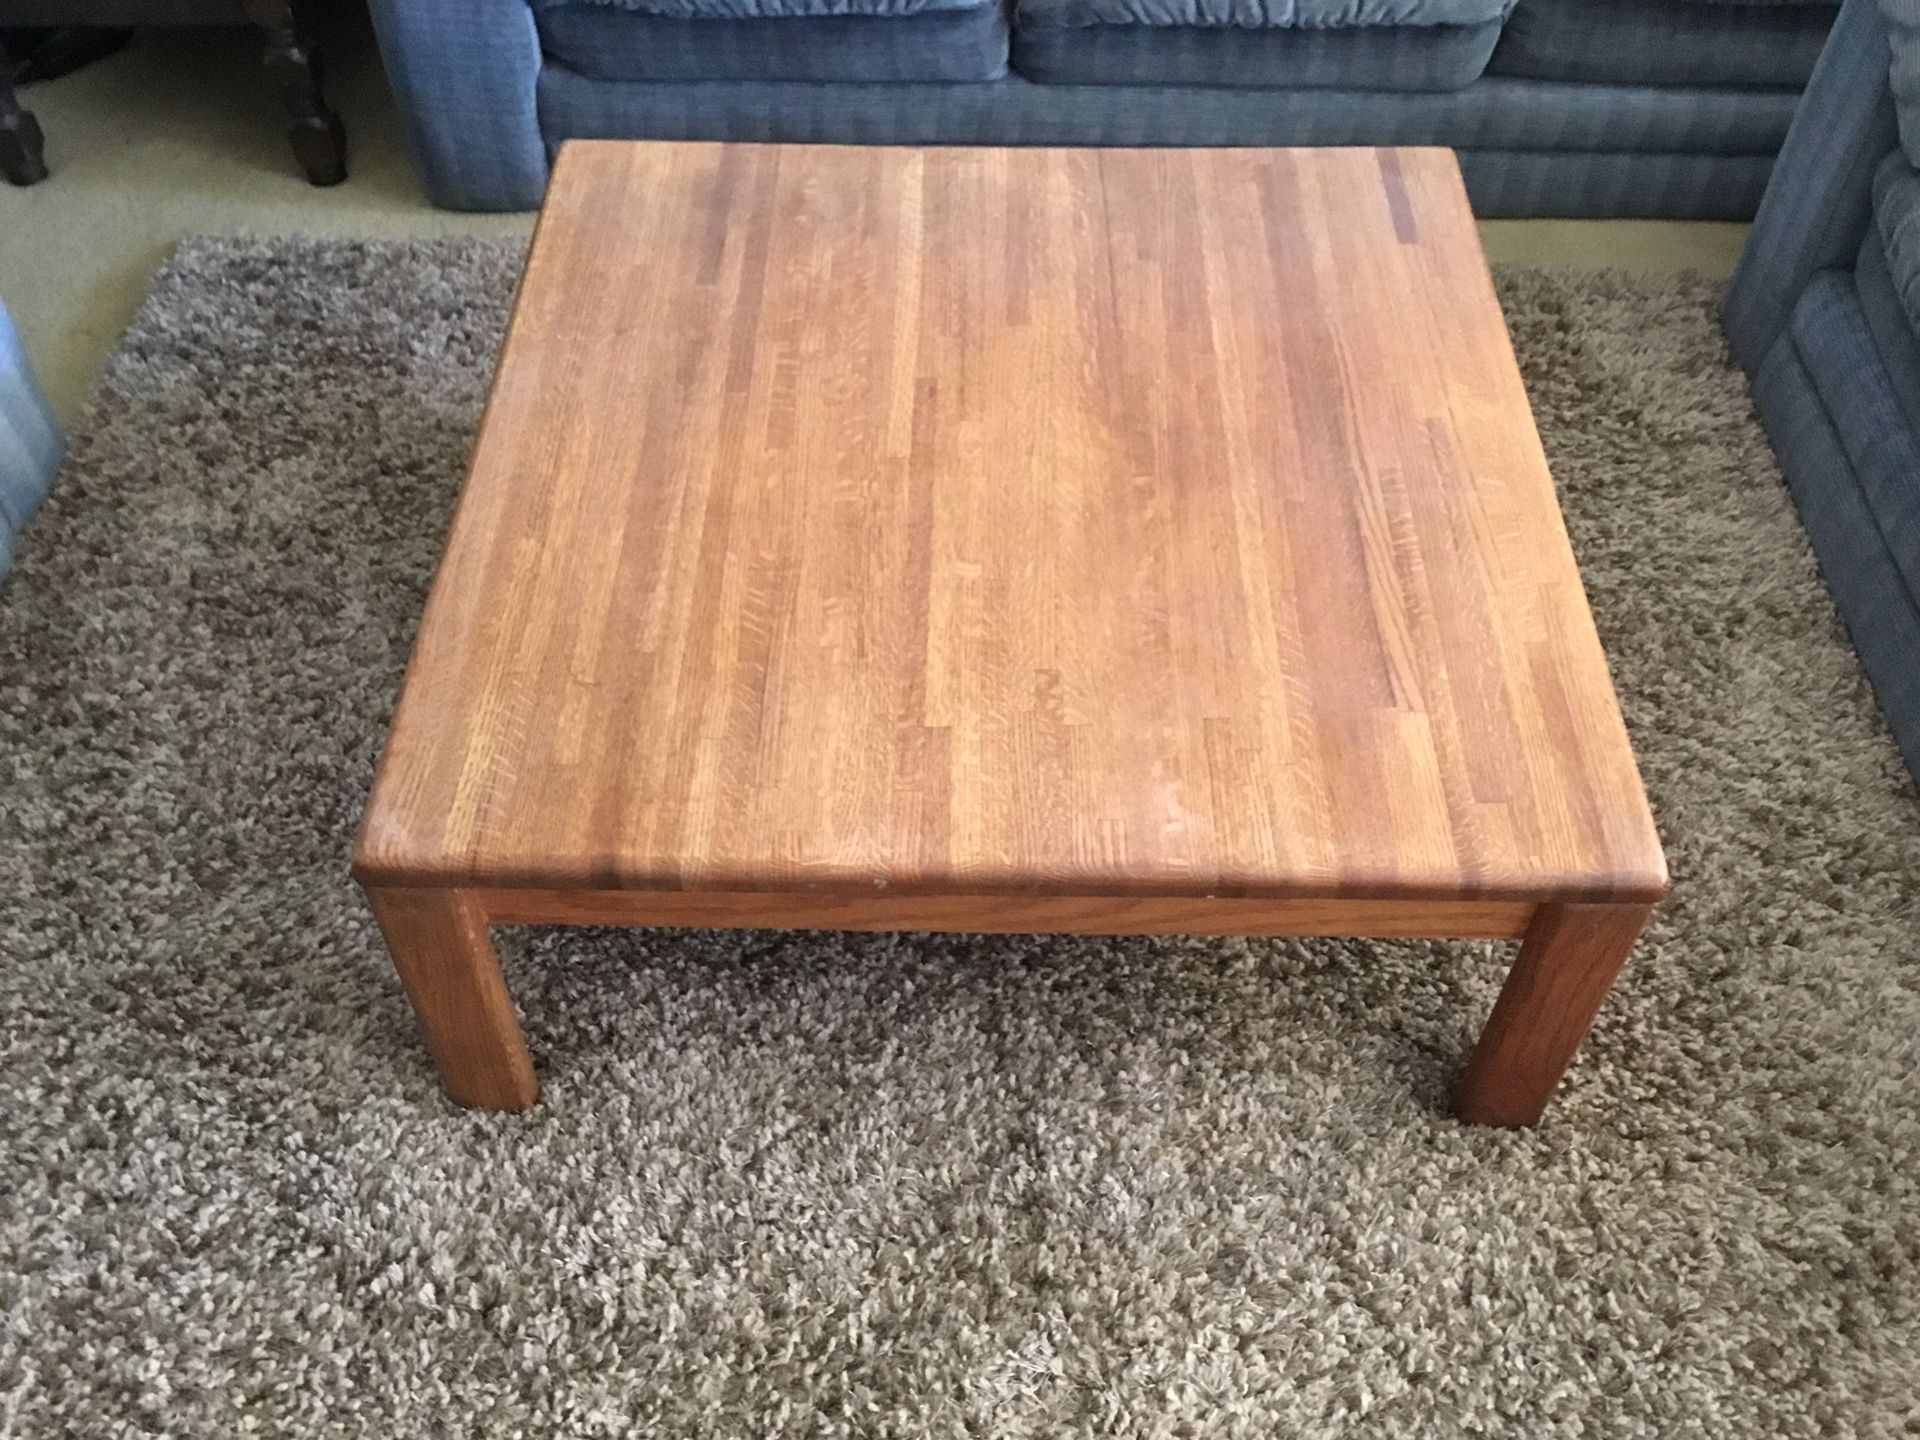 Couch/Loveseat//Chair/End Table Set - Good Condition!